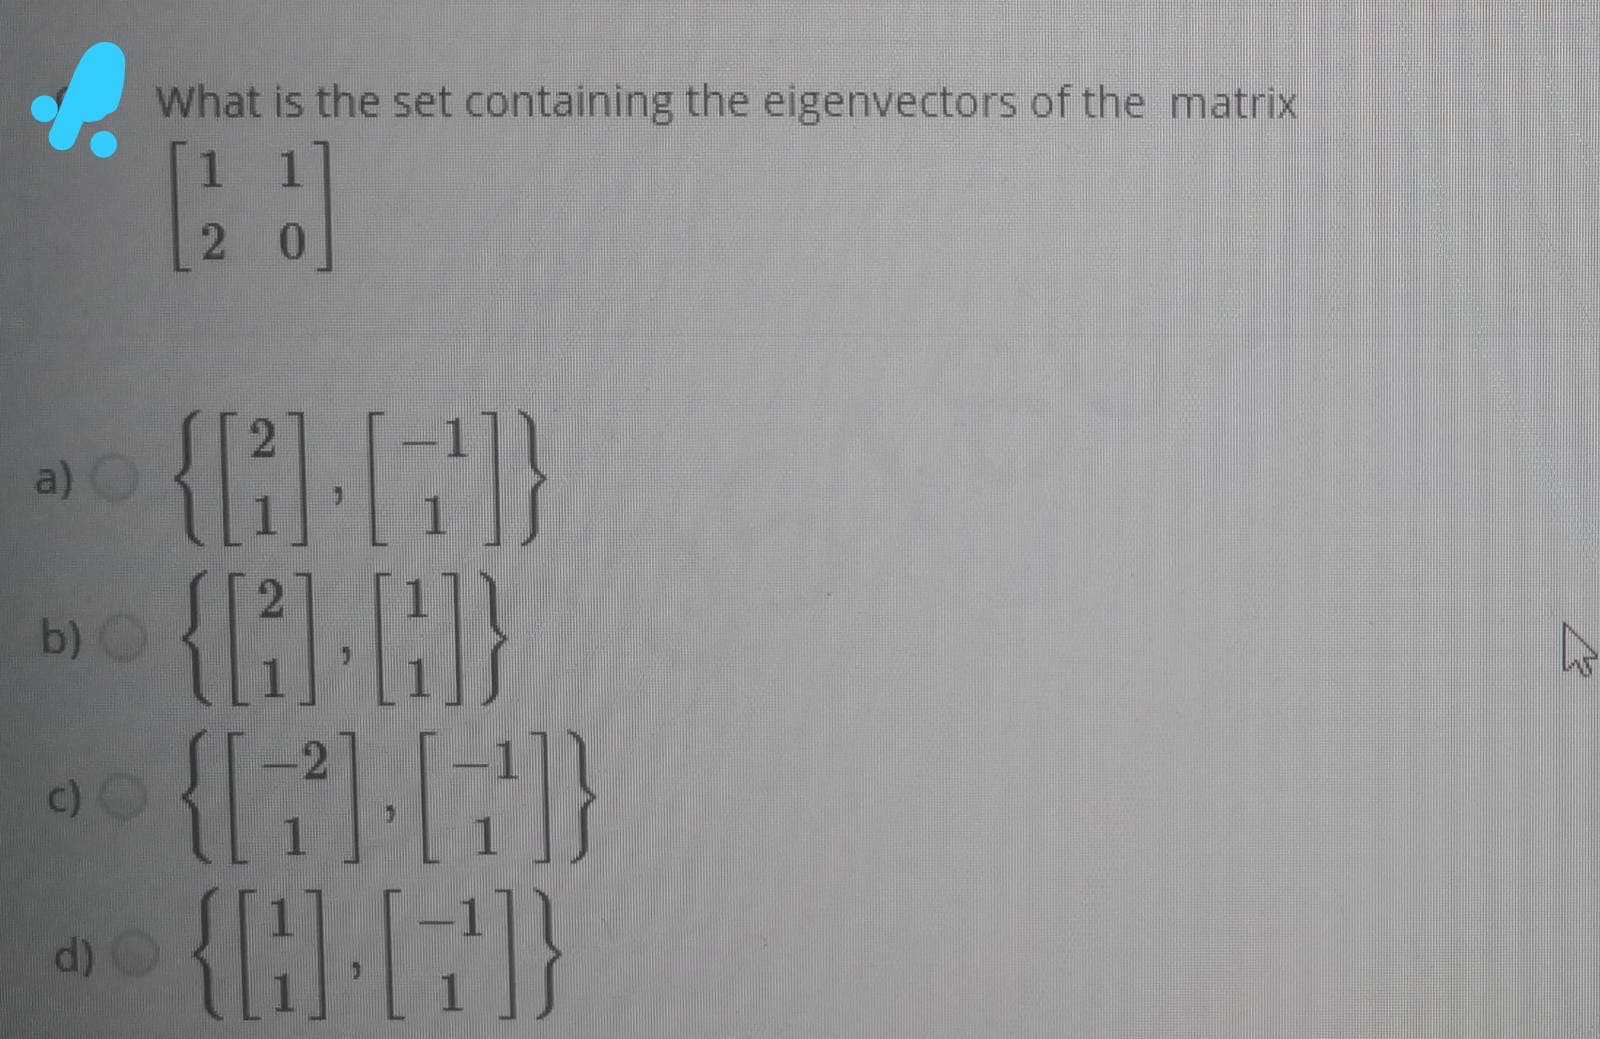 What is the set containing the eigenvectors of the matrix
1
2 0
